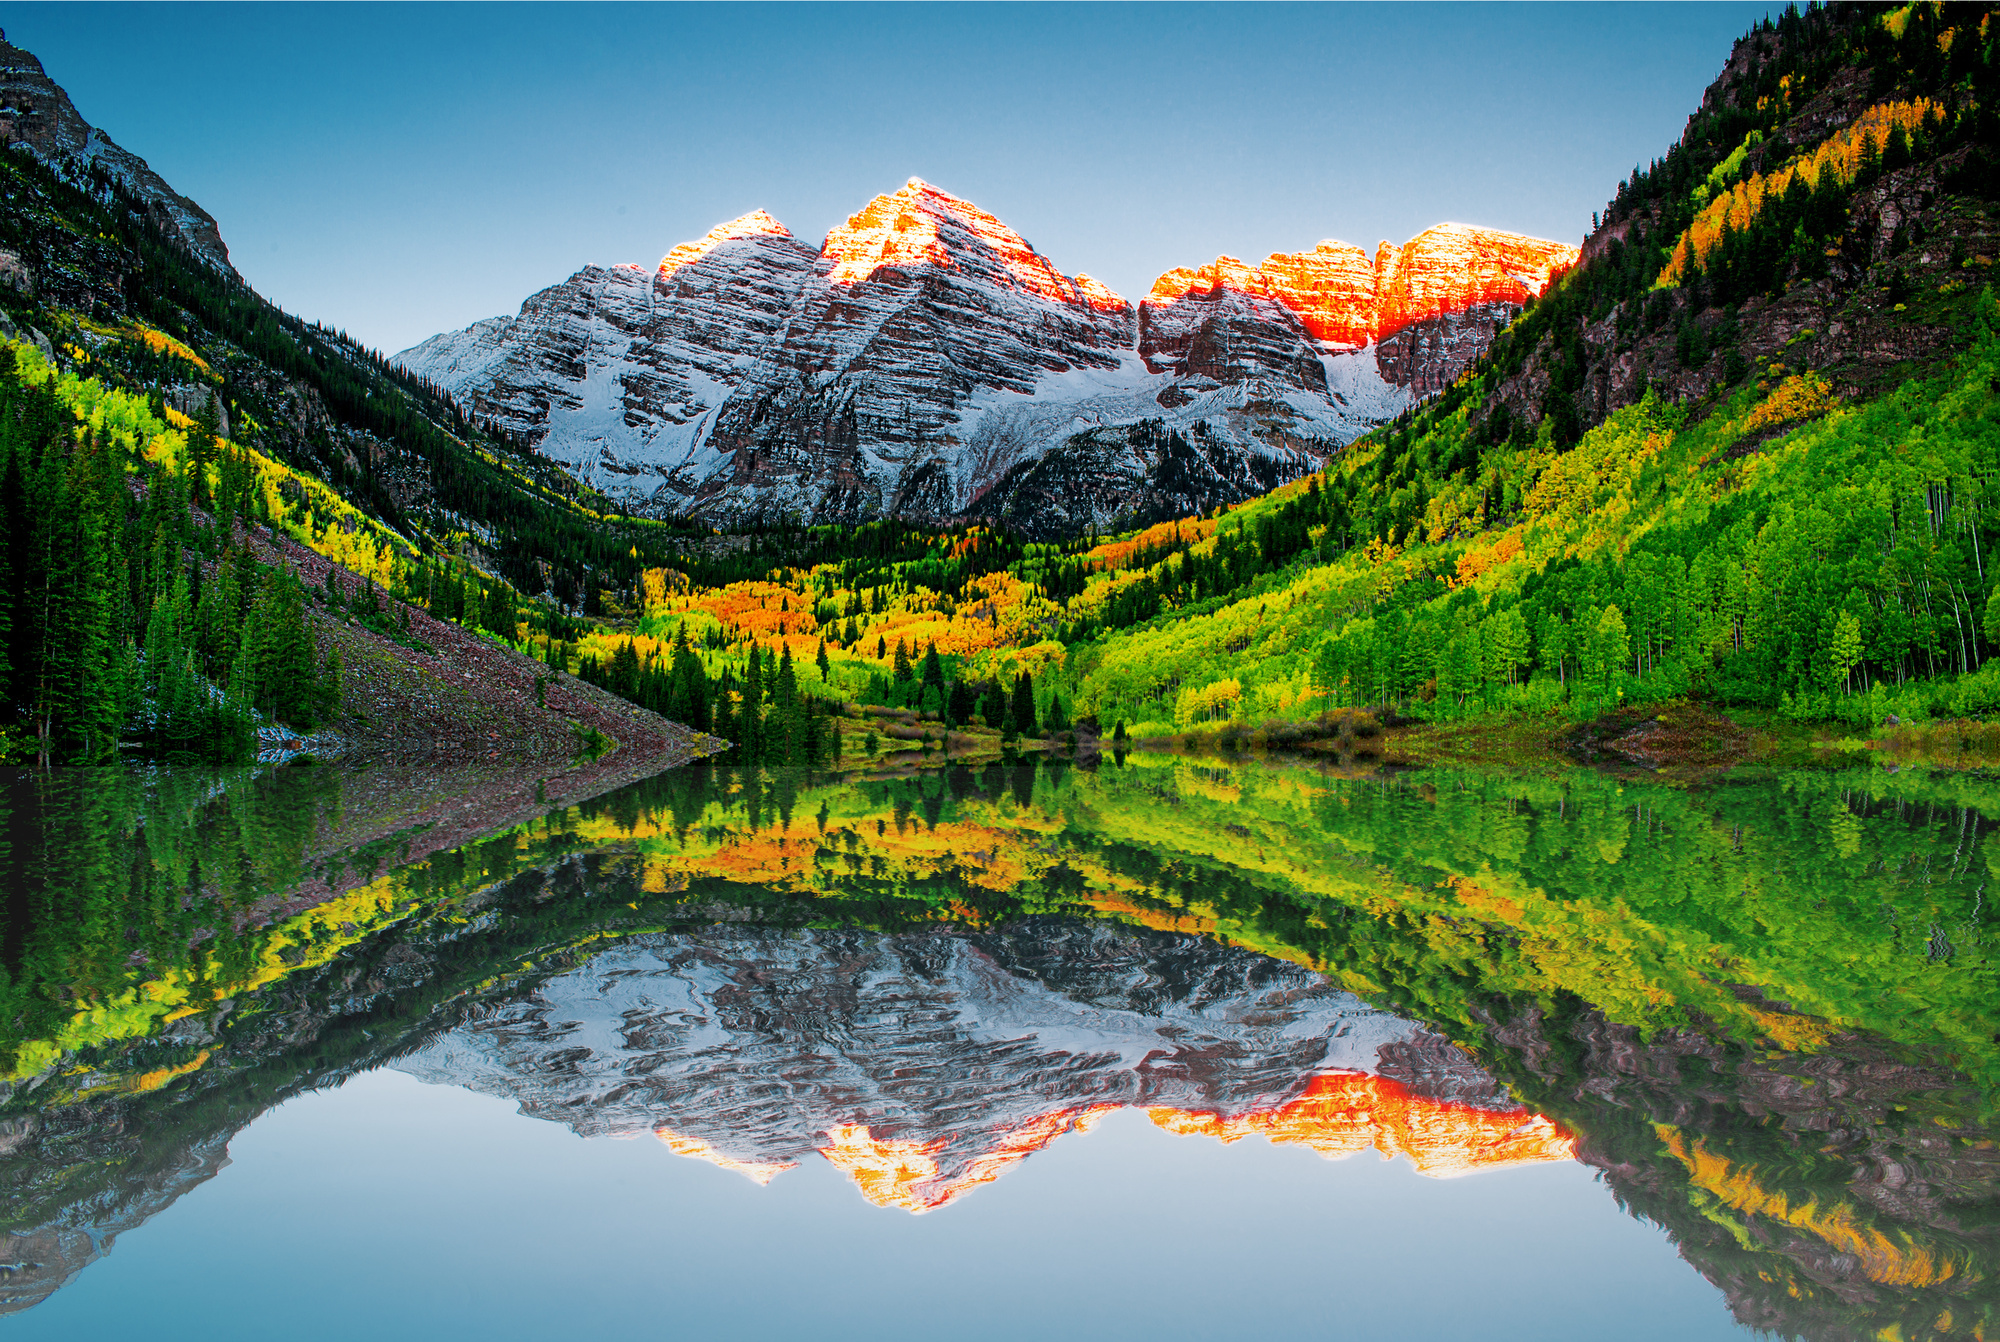 8 Tips to Plan a Colorado Vacation You'll Never Forget